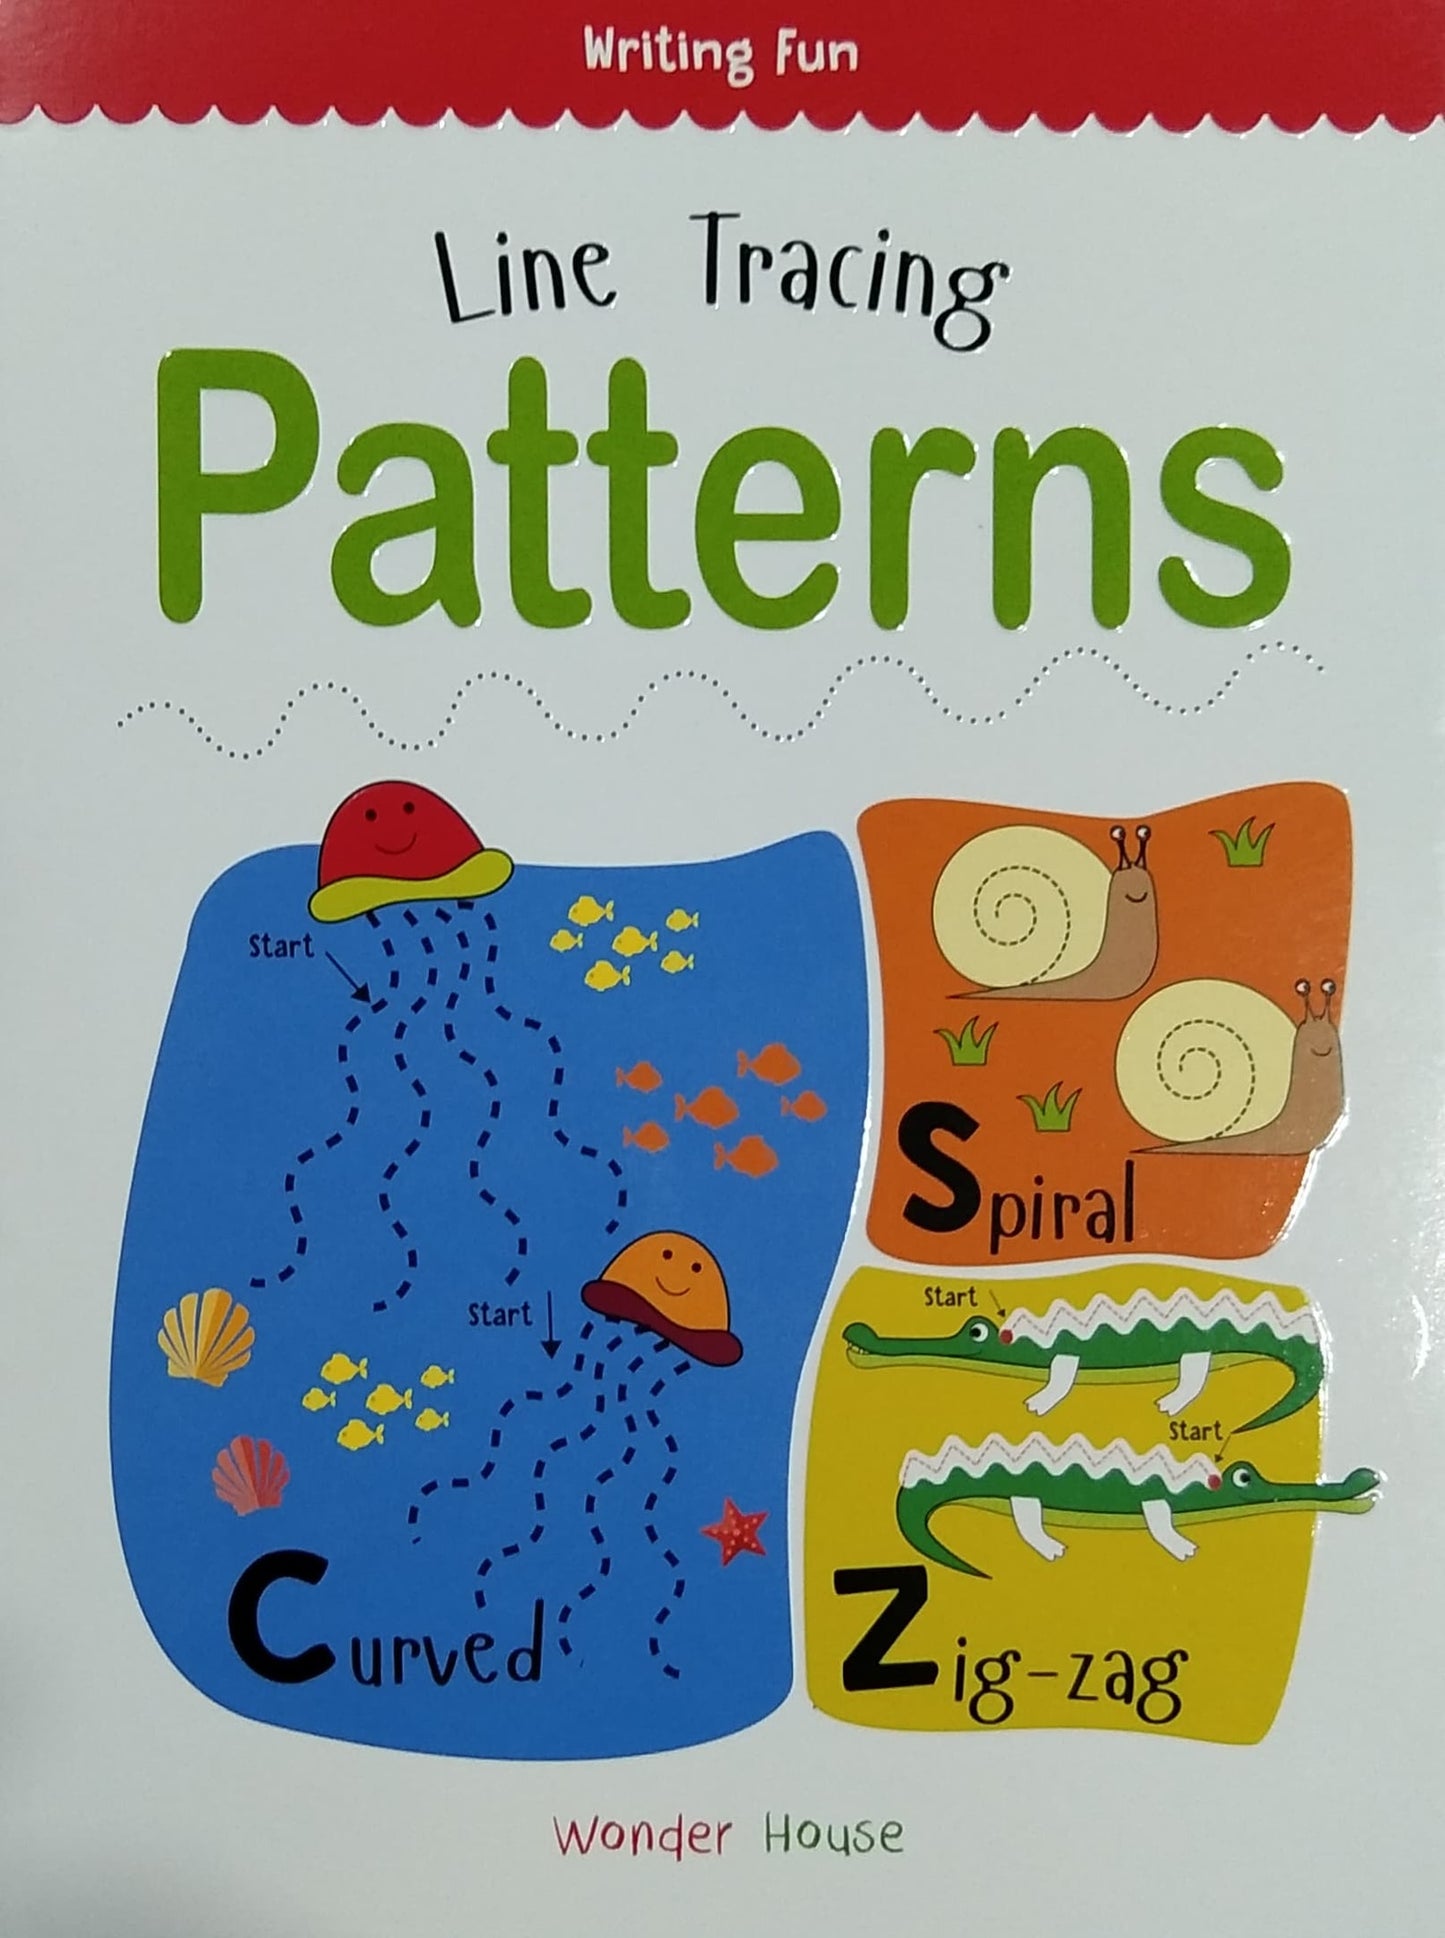 Line Tracing Patterns